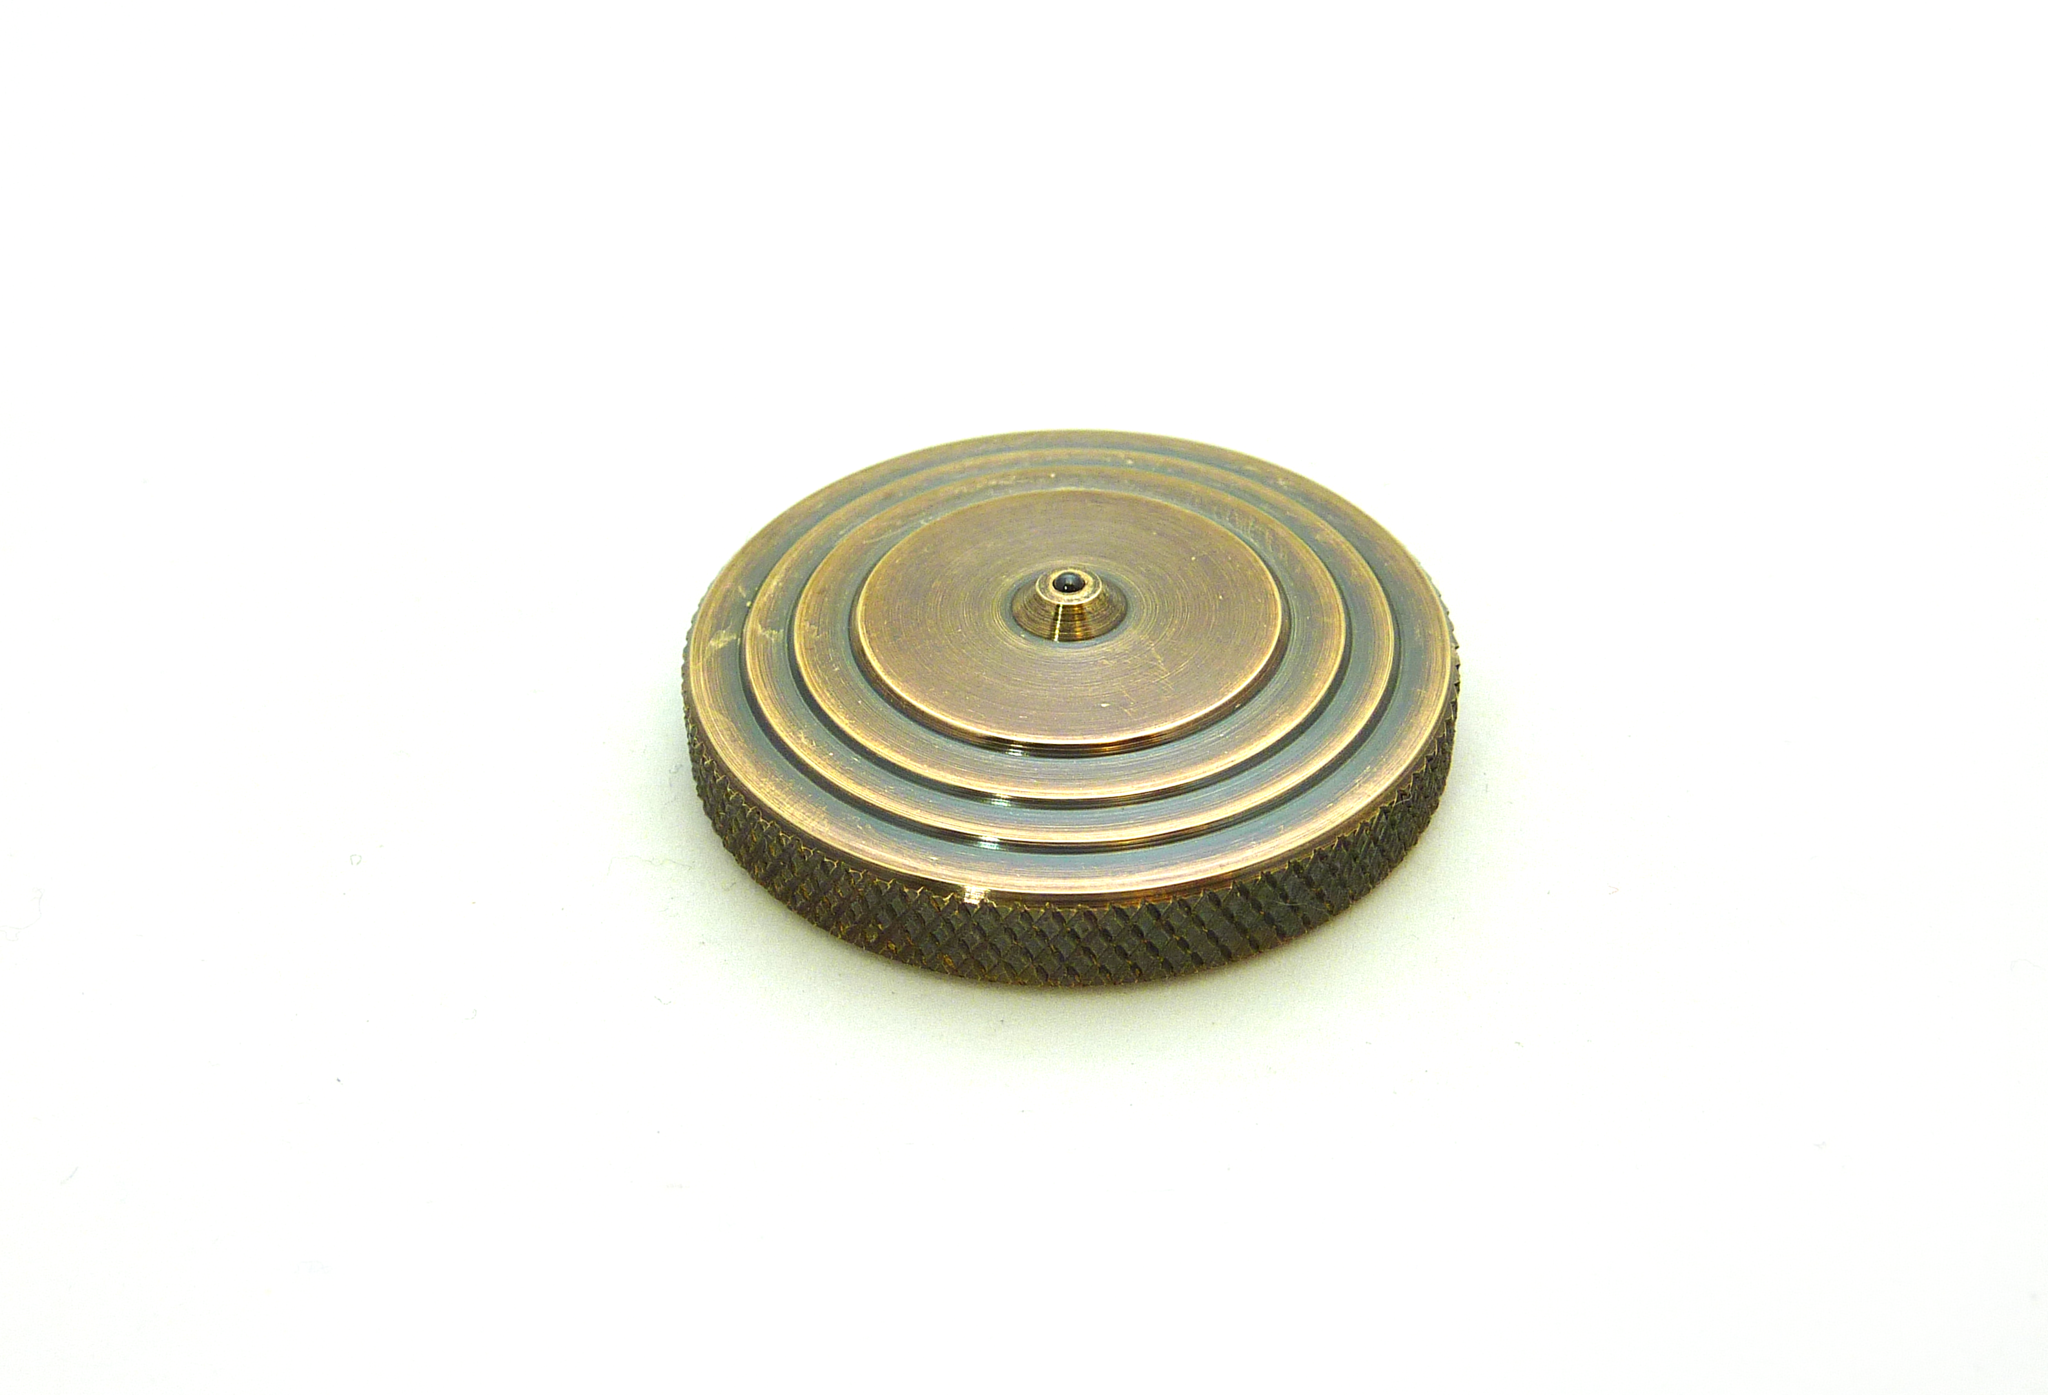 The FlatTop - Aged Bronze EDC Spinning Top